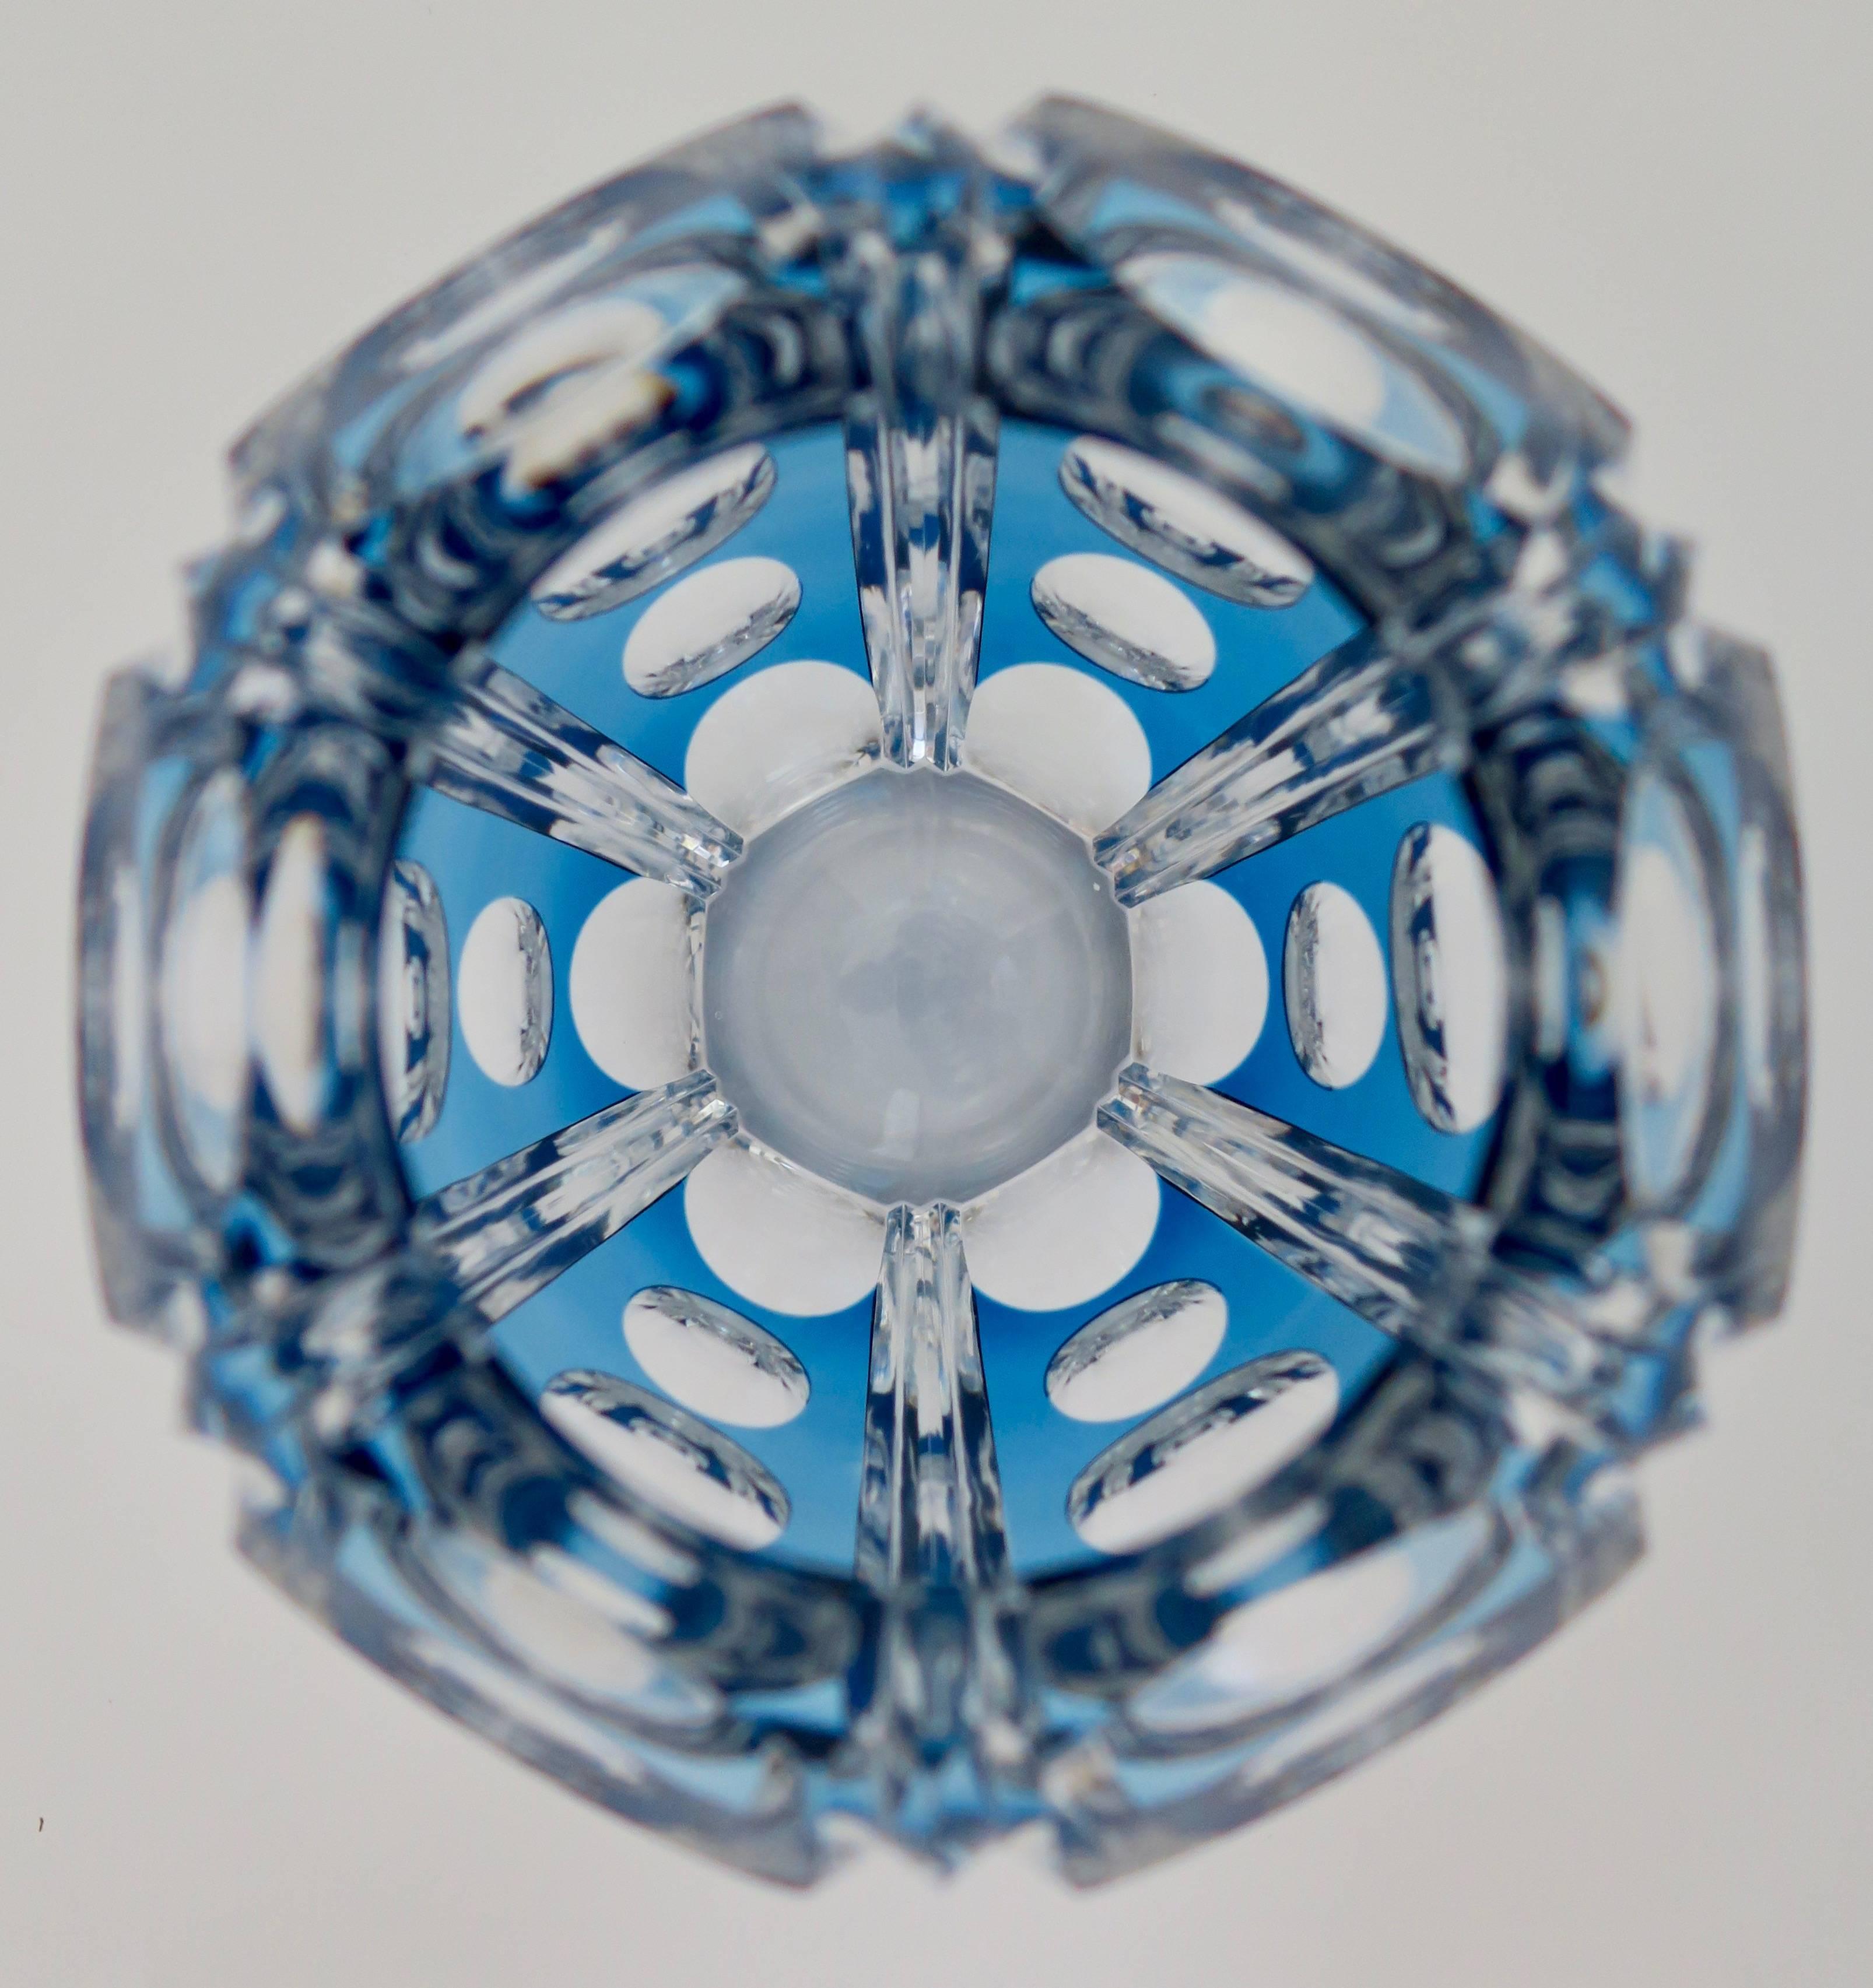 Joseph Simon's exceptional prismatic cut-glass piece

Amazing blue color and its reflections

In absolutely perfect condition: Impecable 

Origin: Belgium, 1930

Dimensions: 25 cm height x 19 cm diameter





           